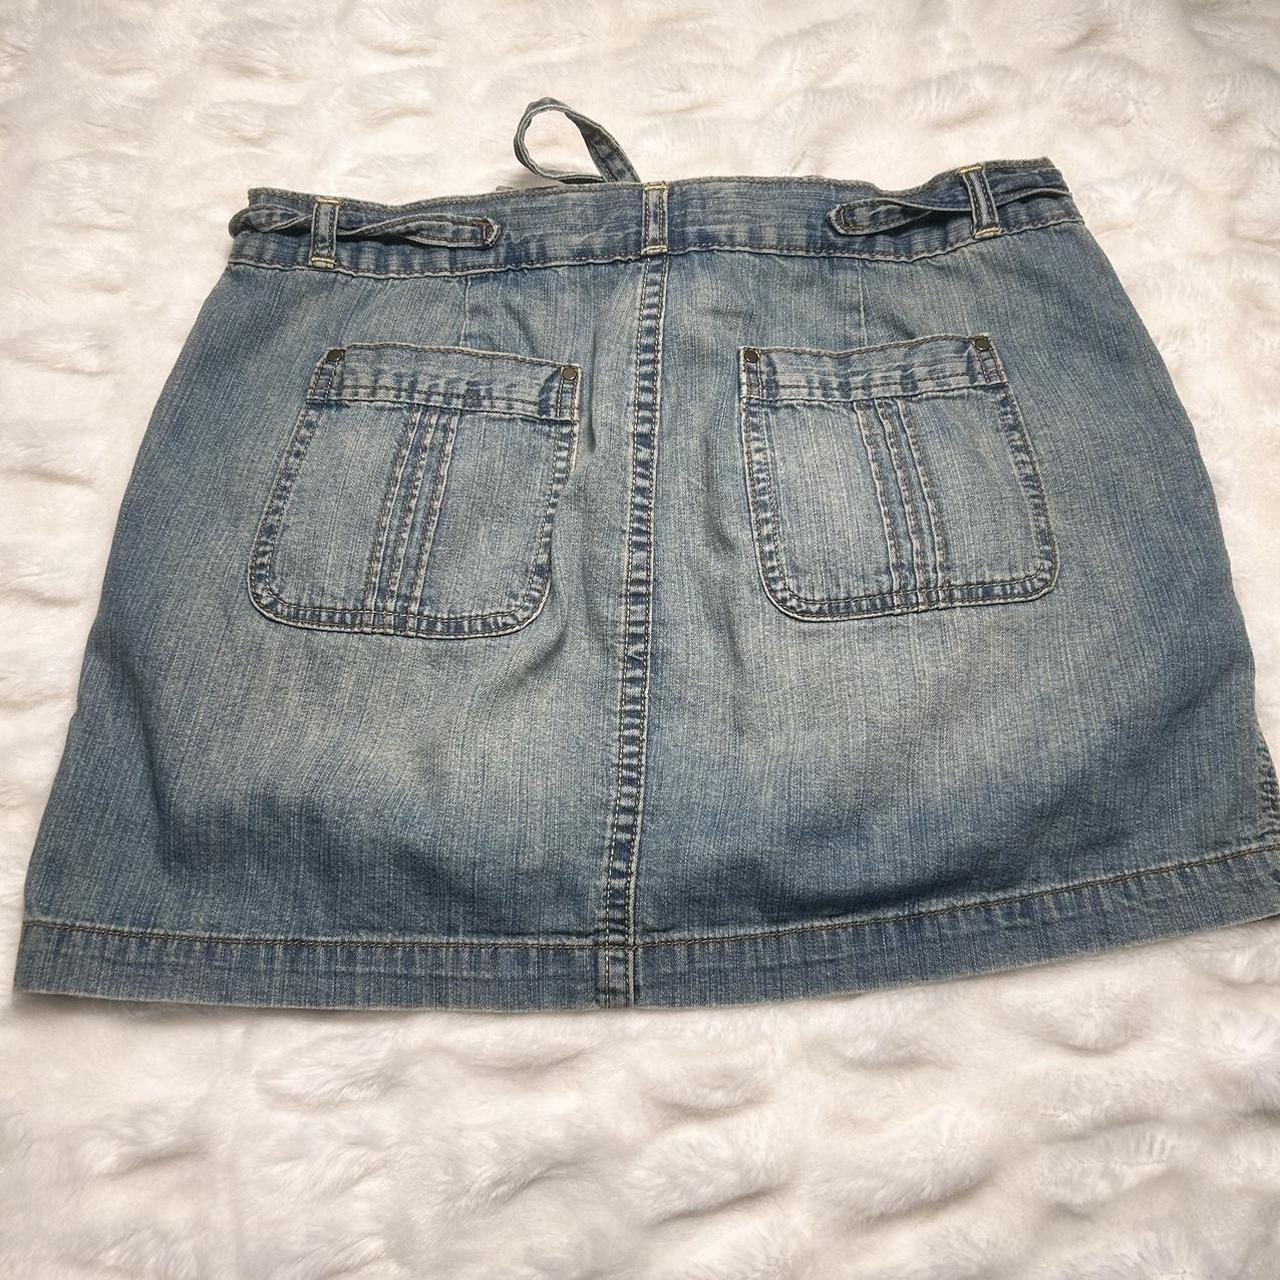 y2k low rise denim skirt by Old Navy💌 so cute with a... - Depop